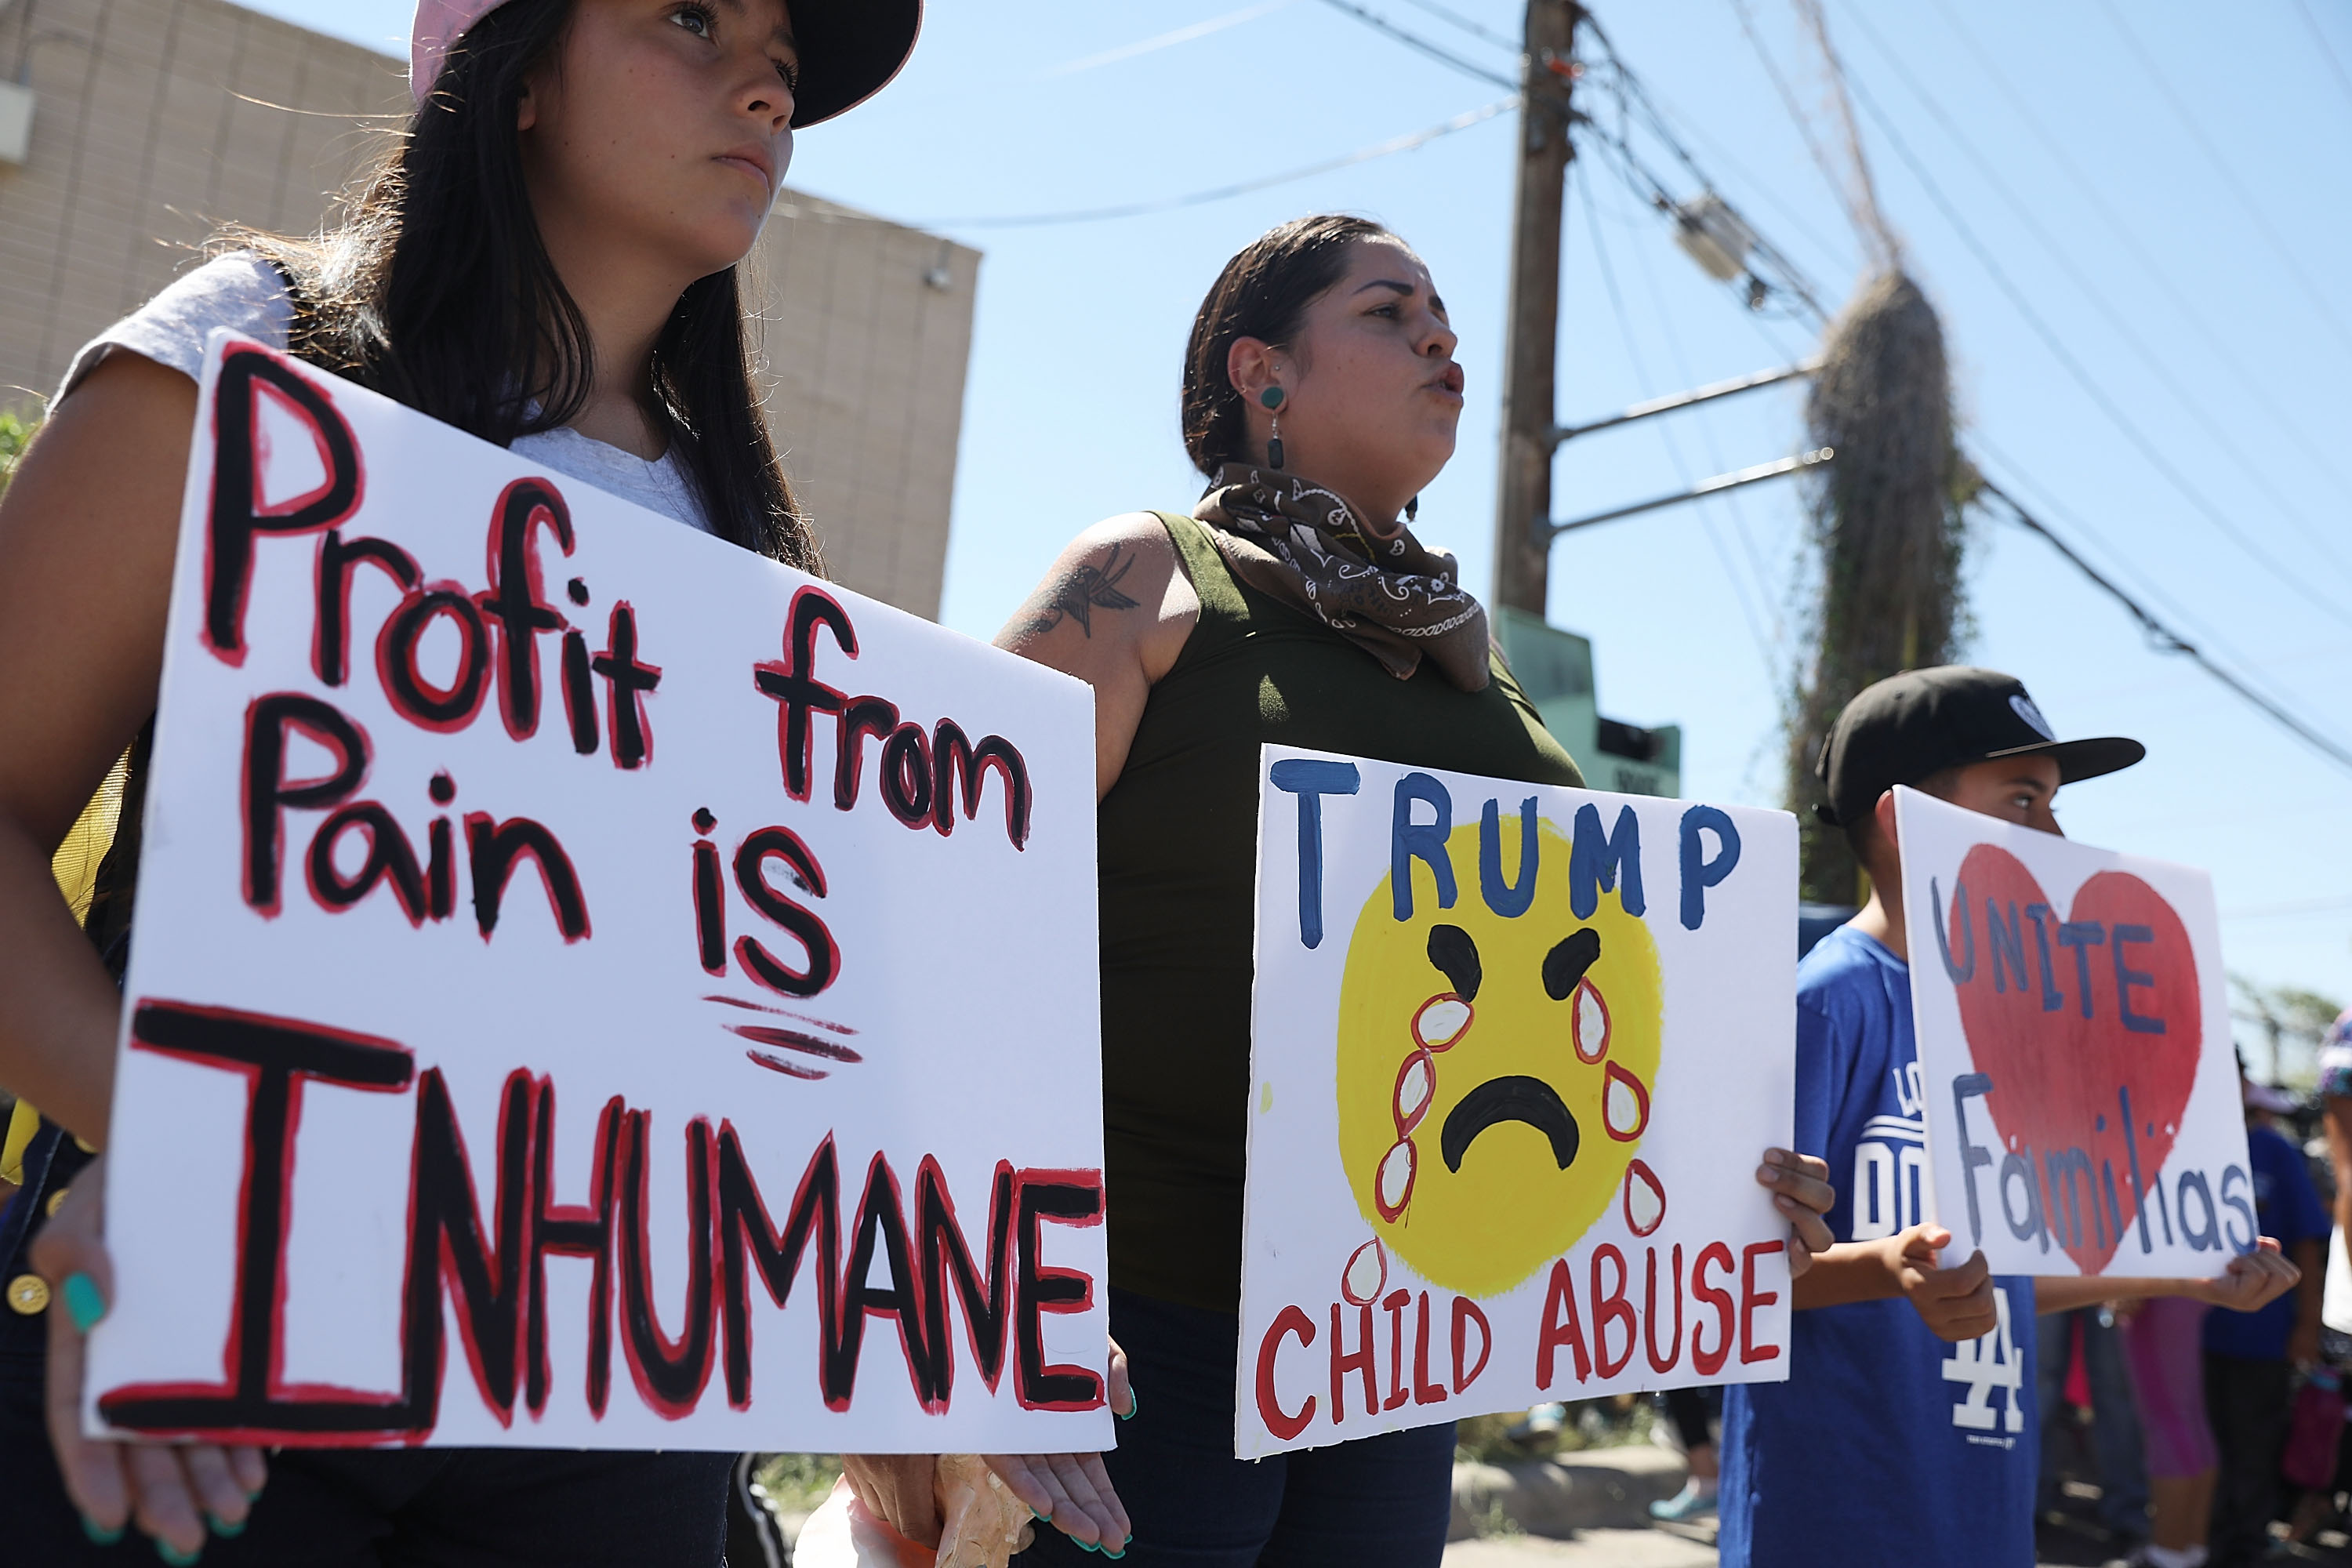 People protest the separation of children from their parents in front of the El Paso Processing Center, an immigration detention facility, at the Mexican border on June 19, 2018 in El Paso, Texas. (Joe Raedle—Getty Images)